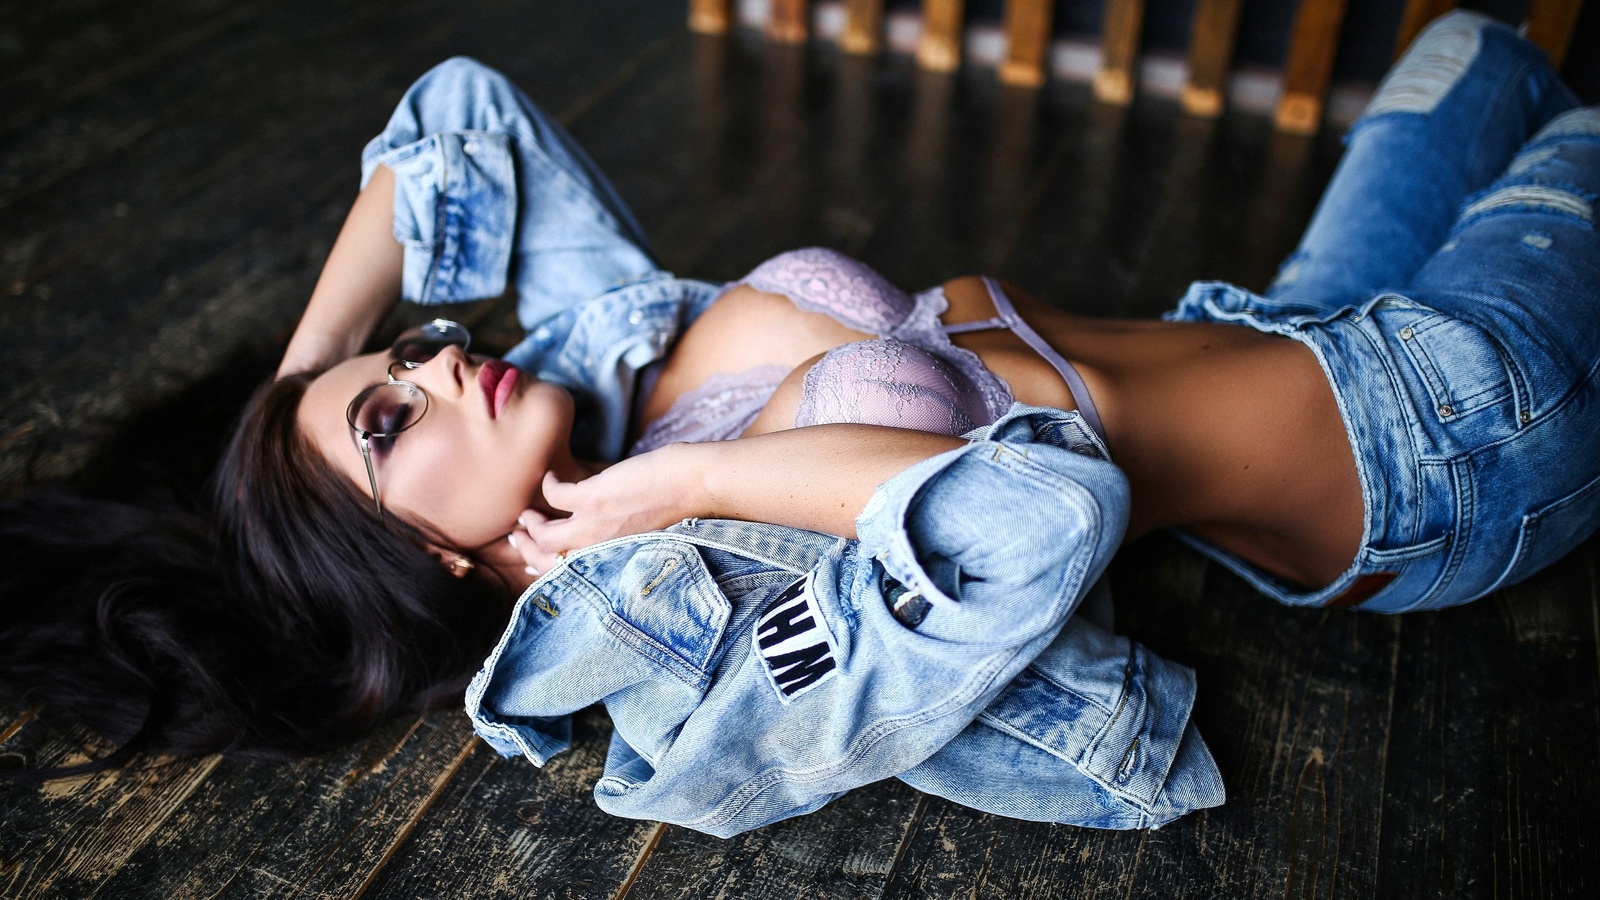 women, purple bra, torn jeans, denim, women with glasses, tanned, wooden surface, closed eyes, belly, pink lipstick, lying on back